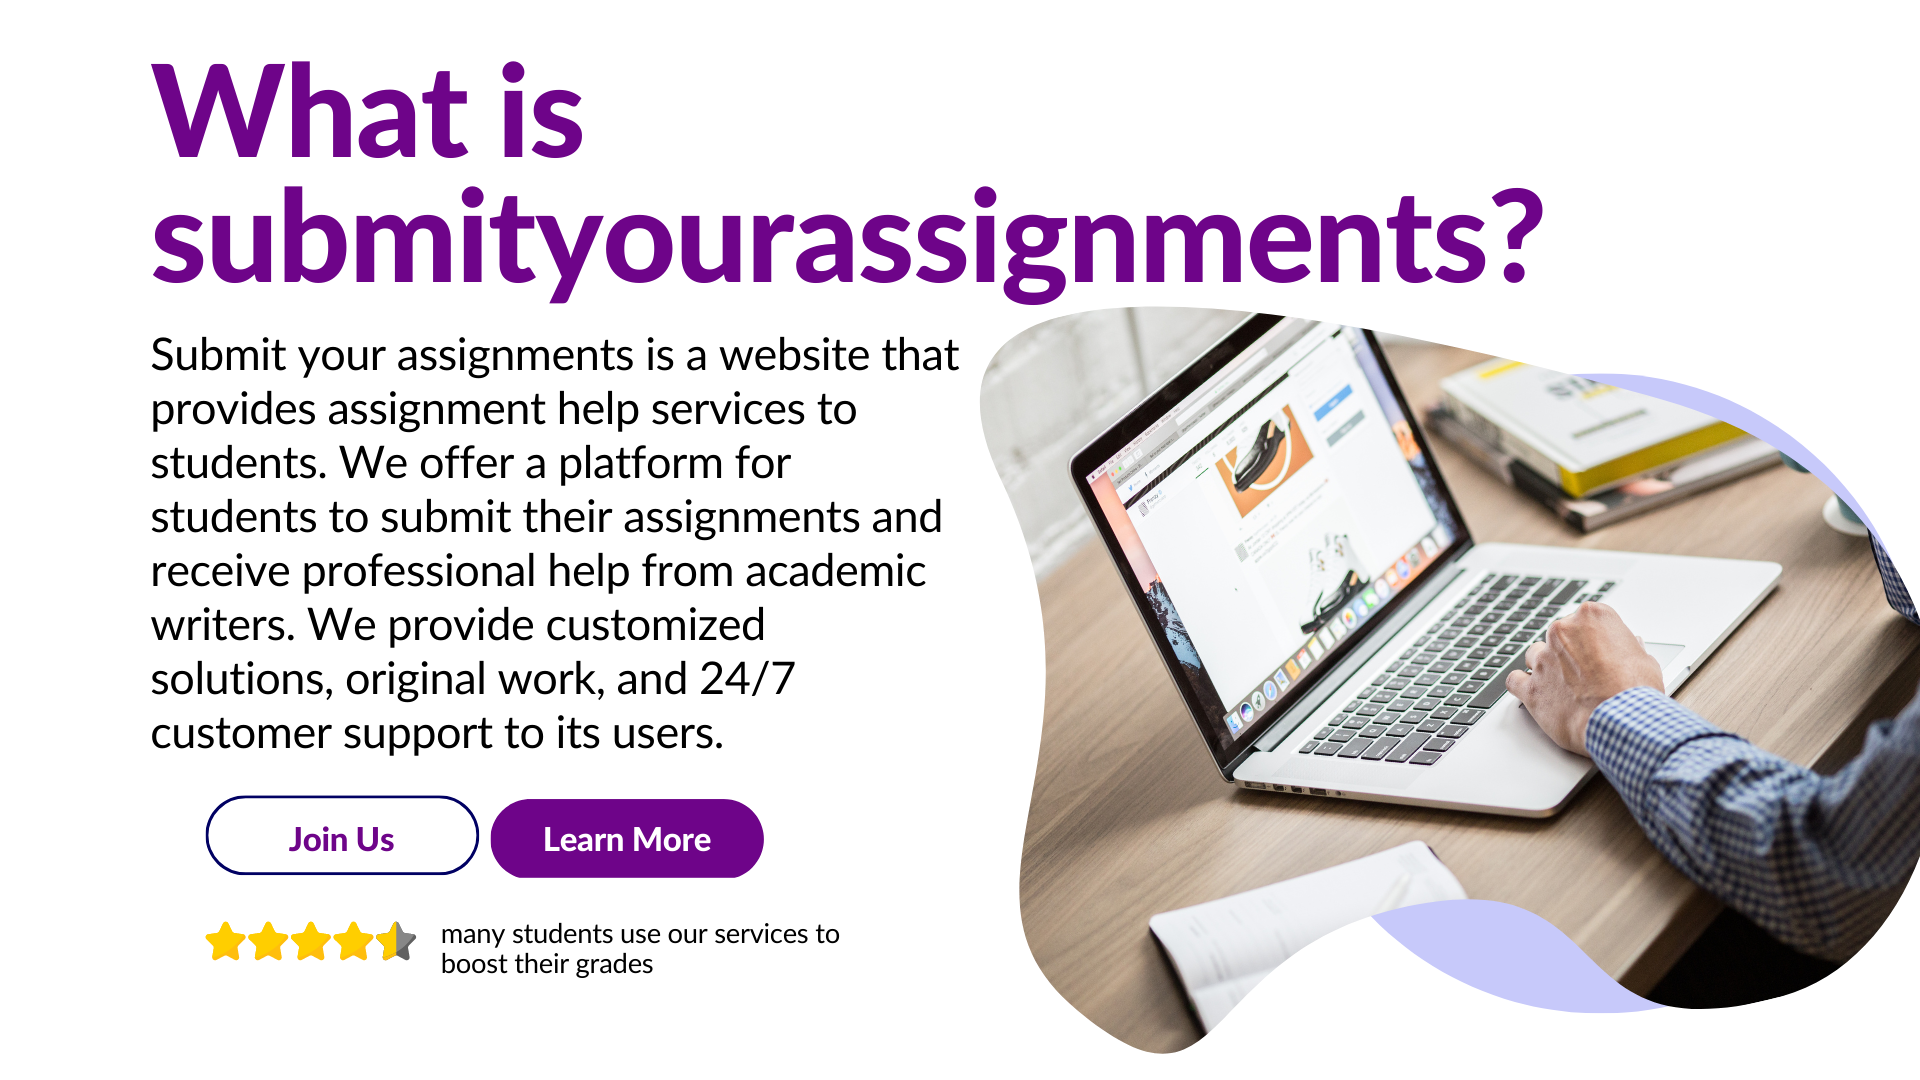 submit your assignments